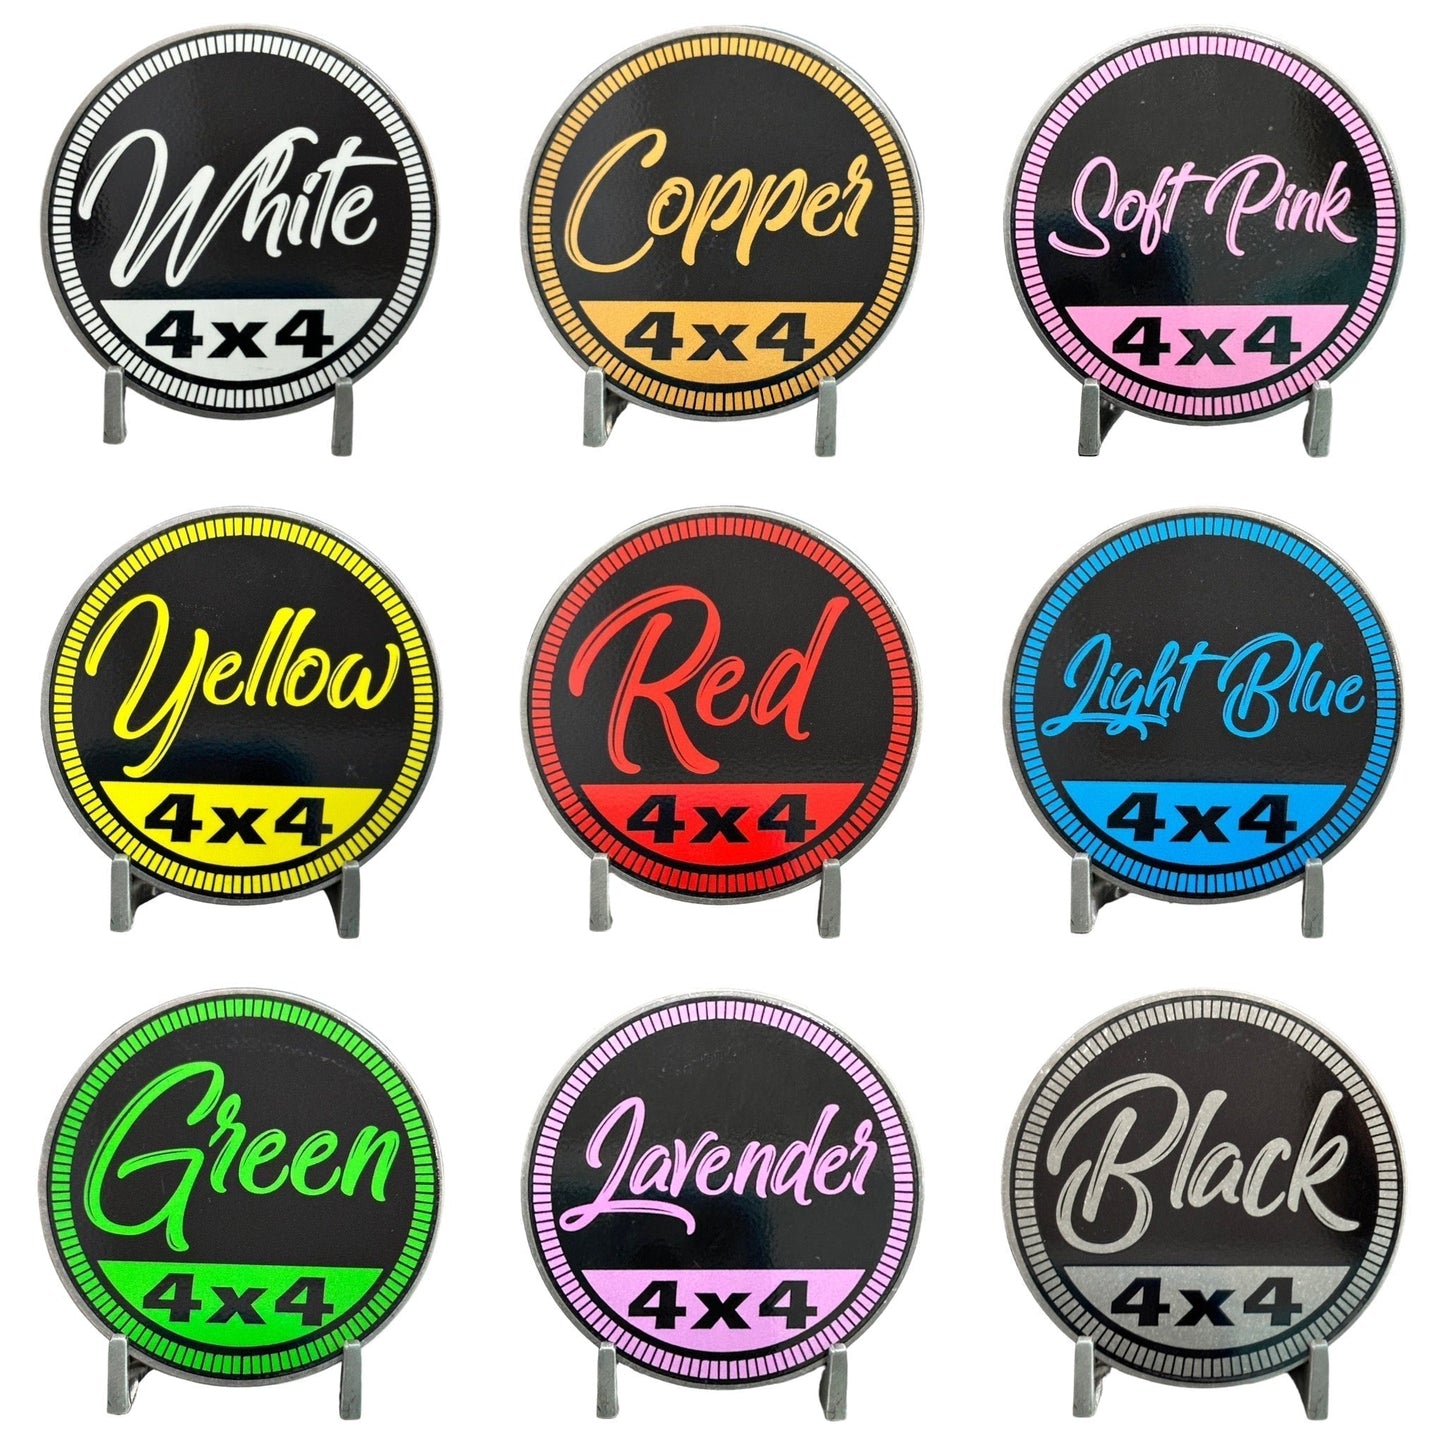 Badge - 606 Jeepin (Multiple Colors Available)